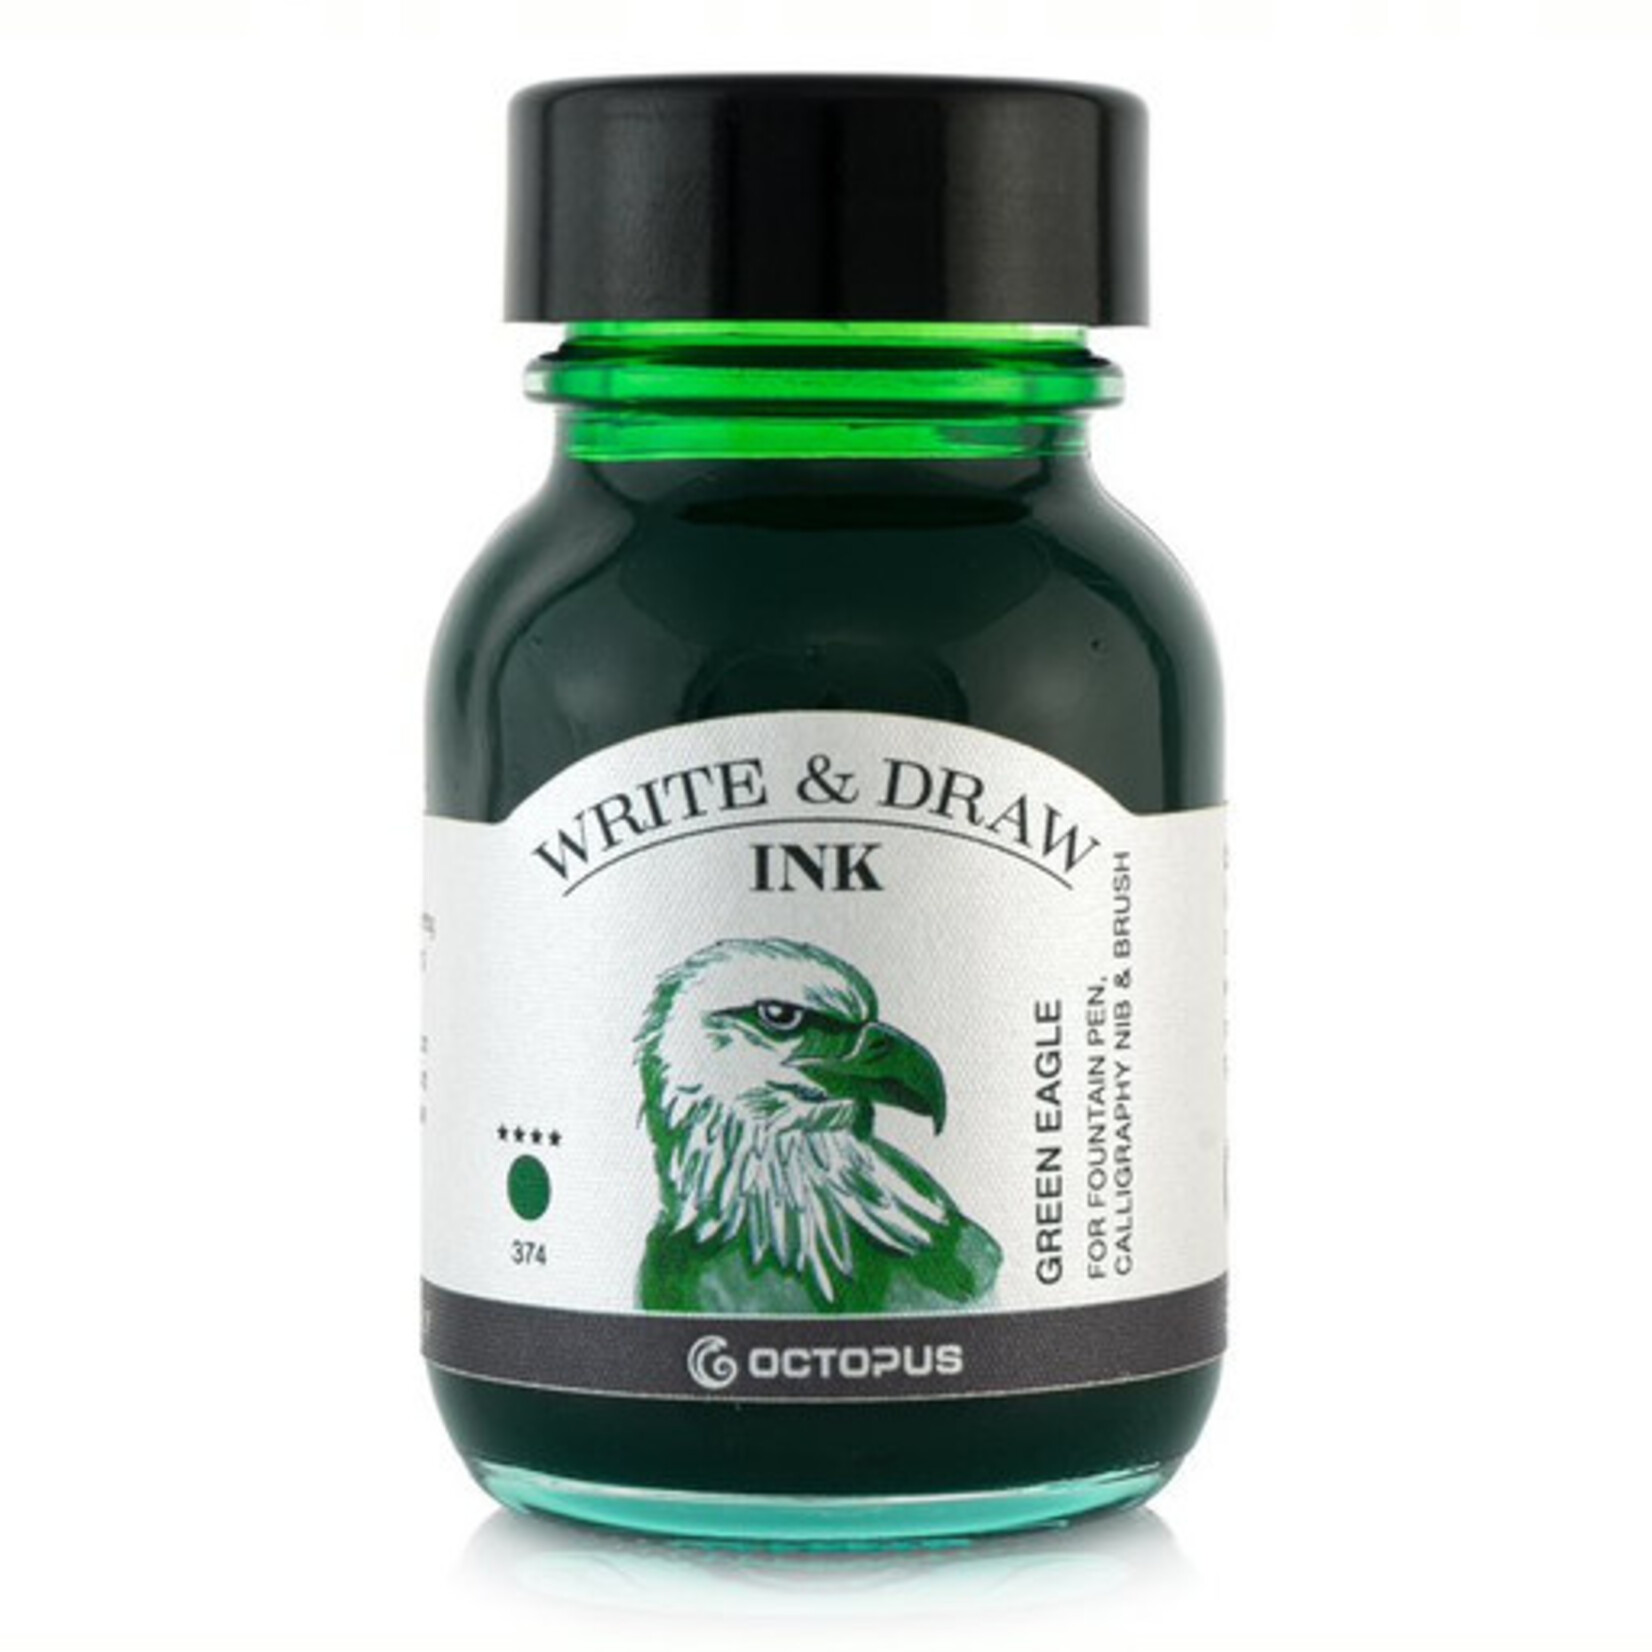 OCTOPUS WRITE & DRAW OCTOPUS WRITE & DRAW INK 50ML 374 GREEN EAGLE